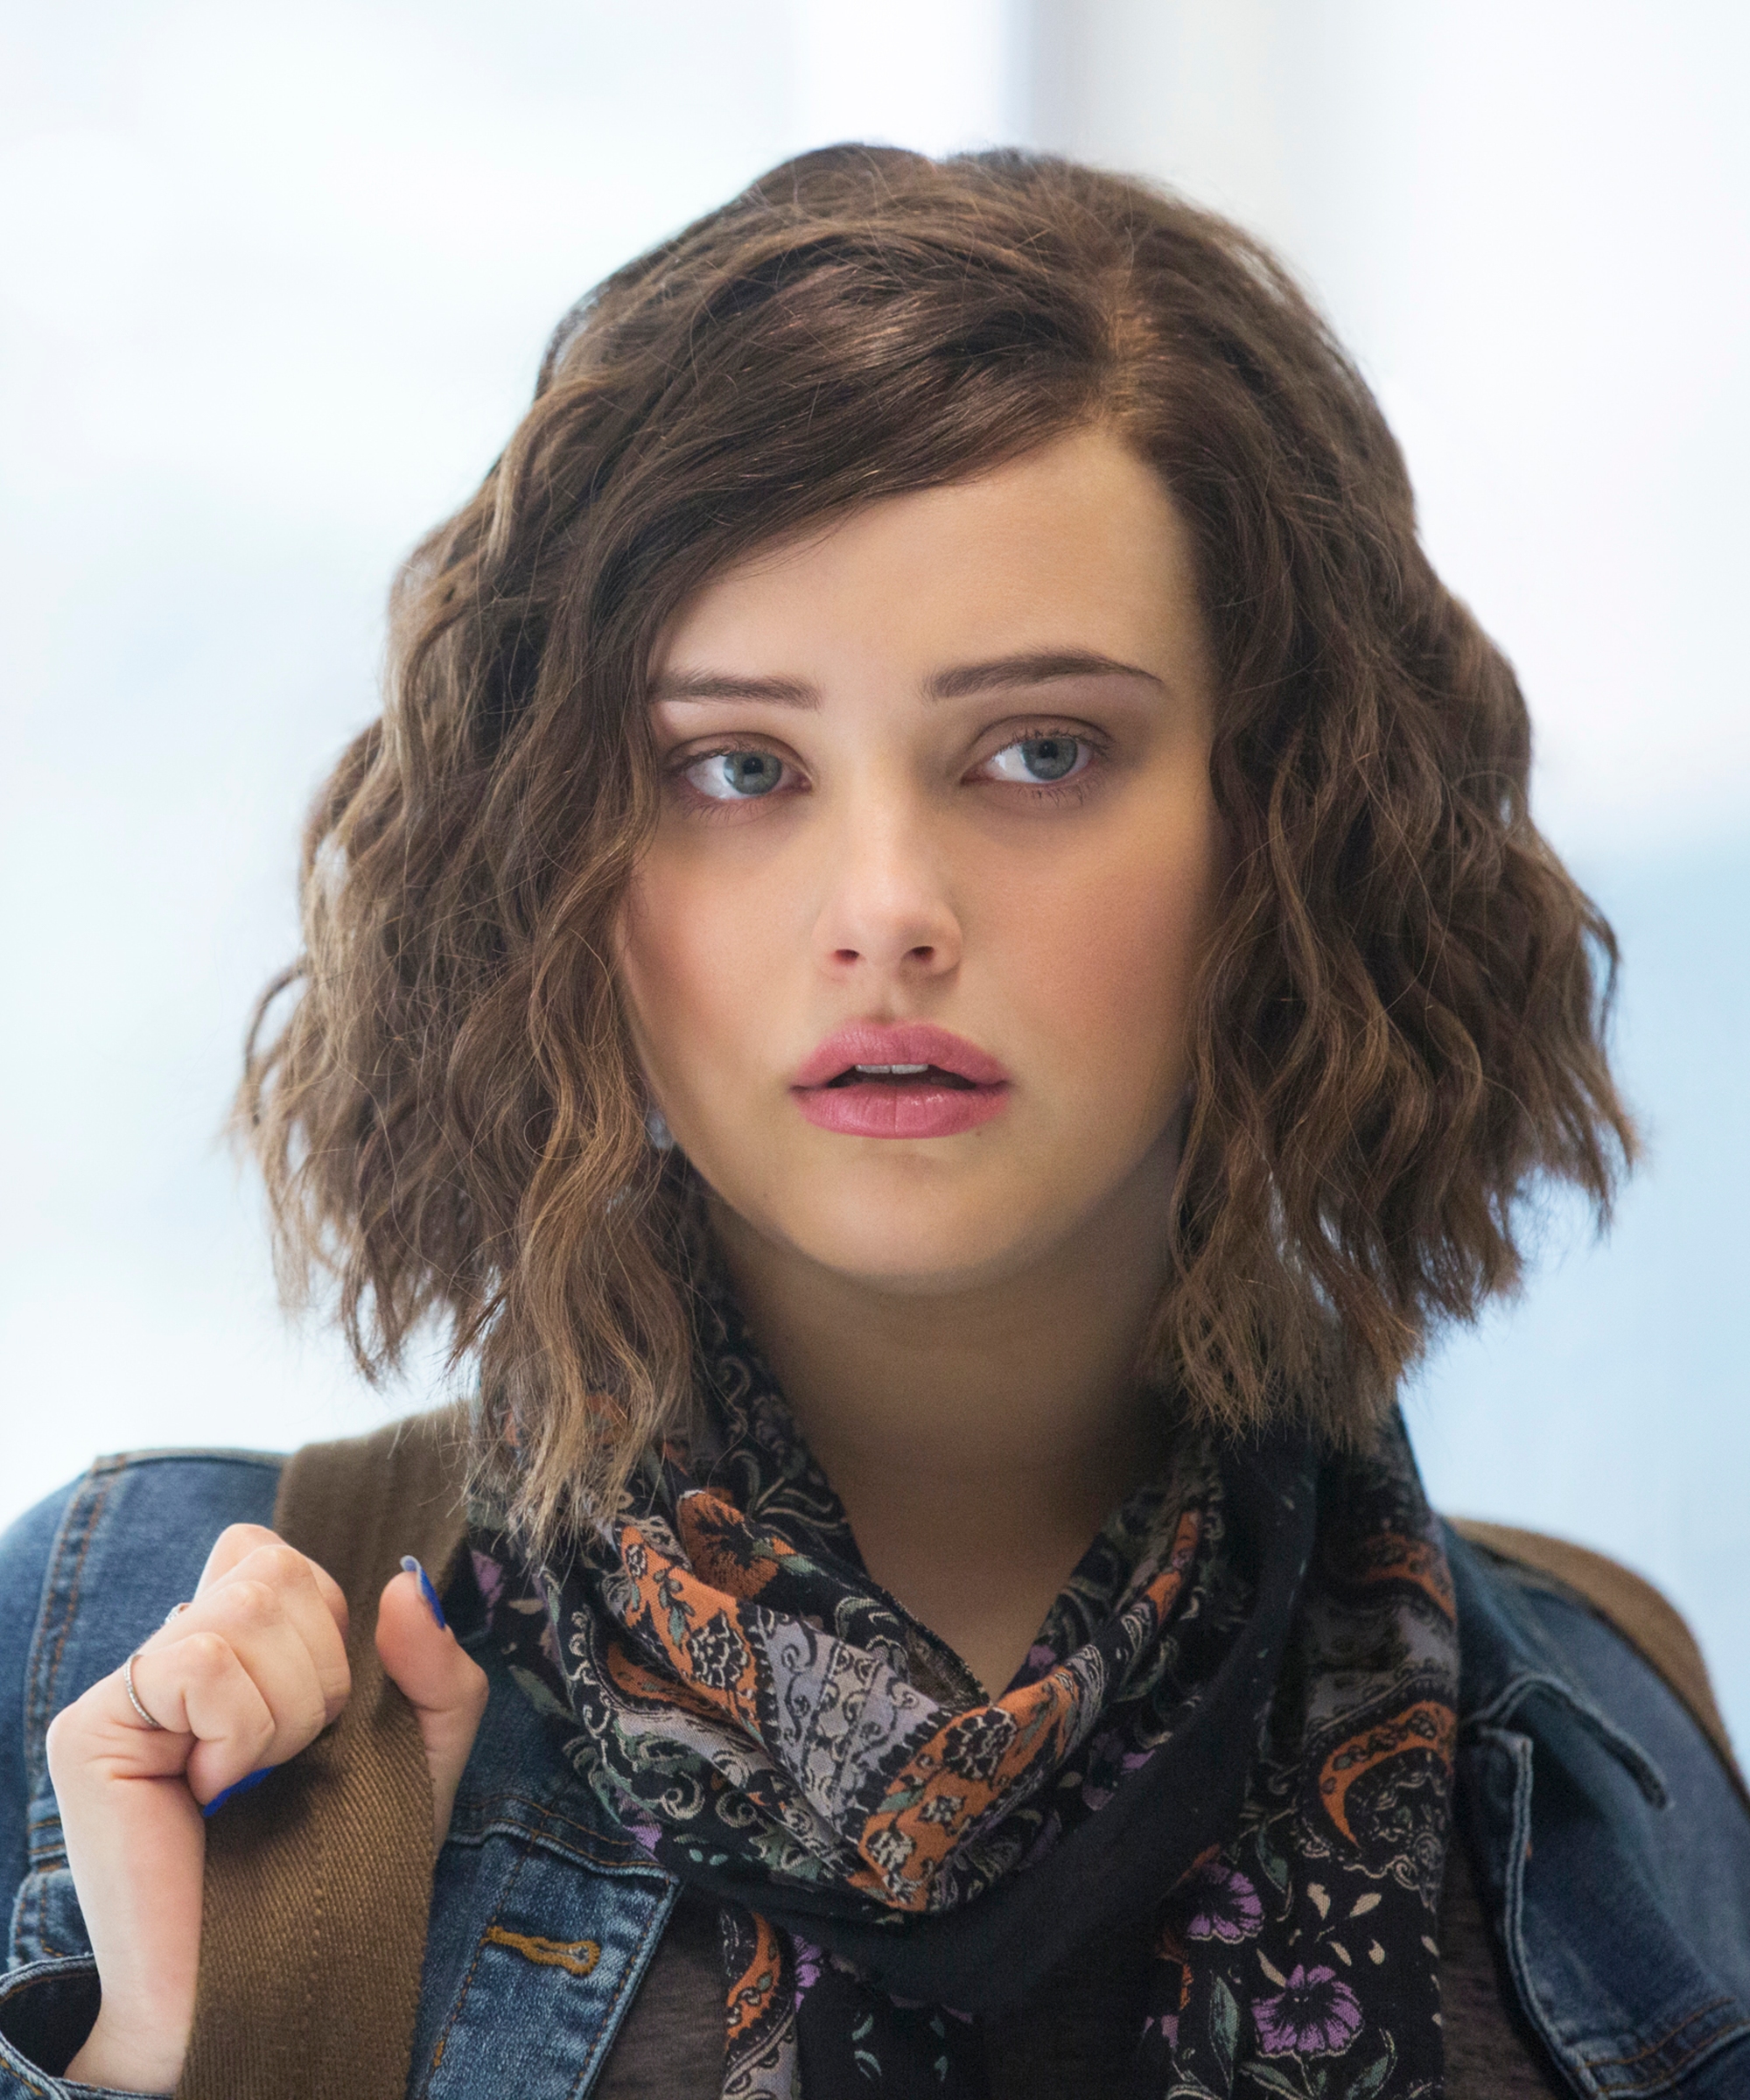 Katherine Langford in 13 Reasons Why